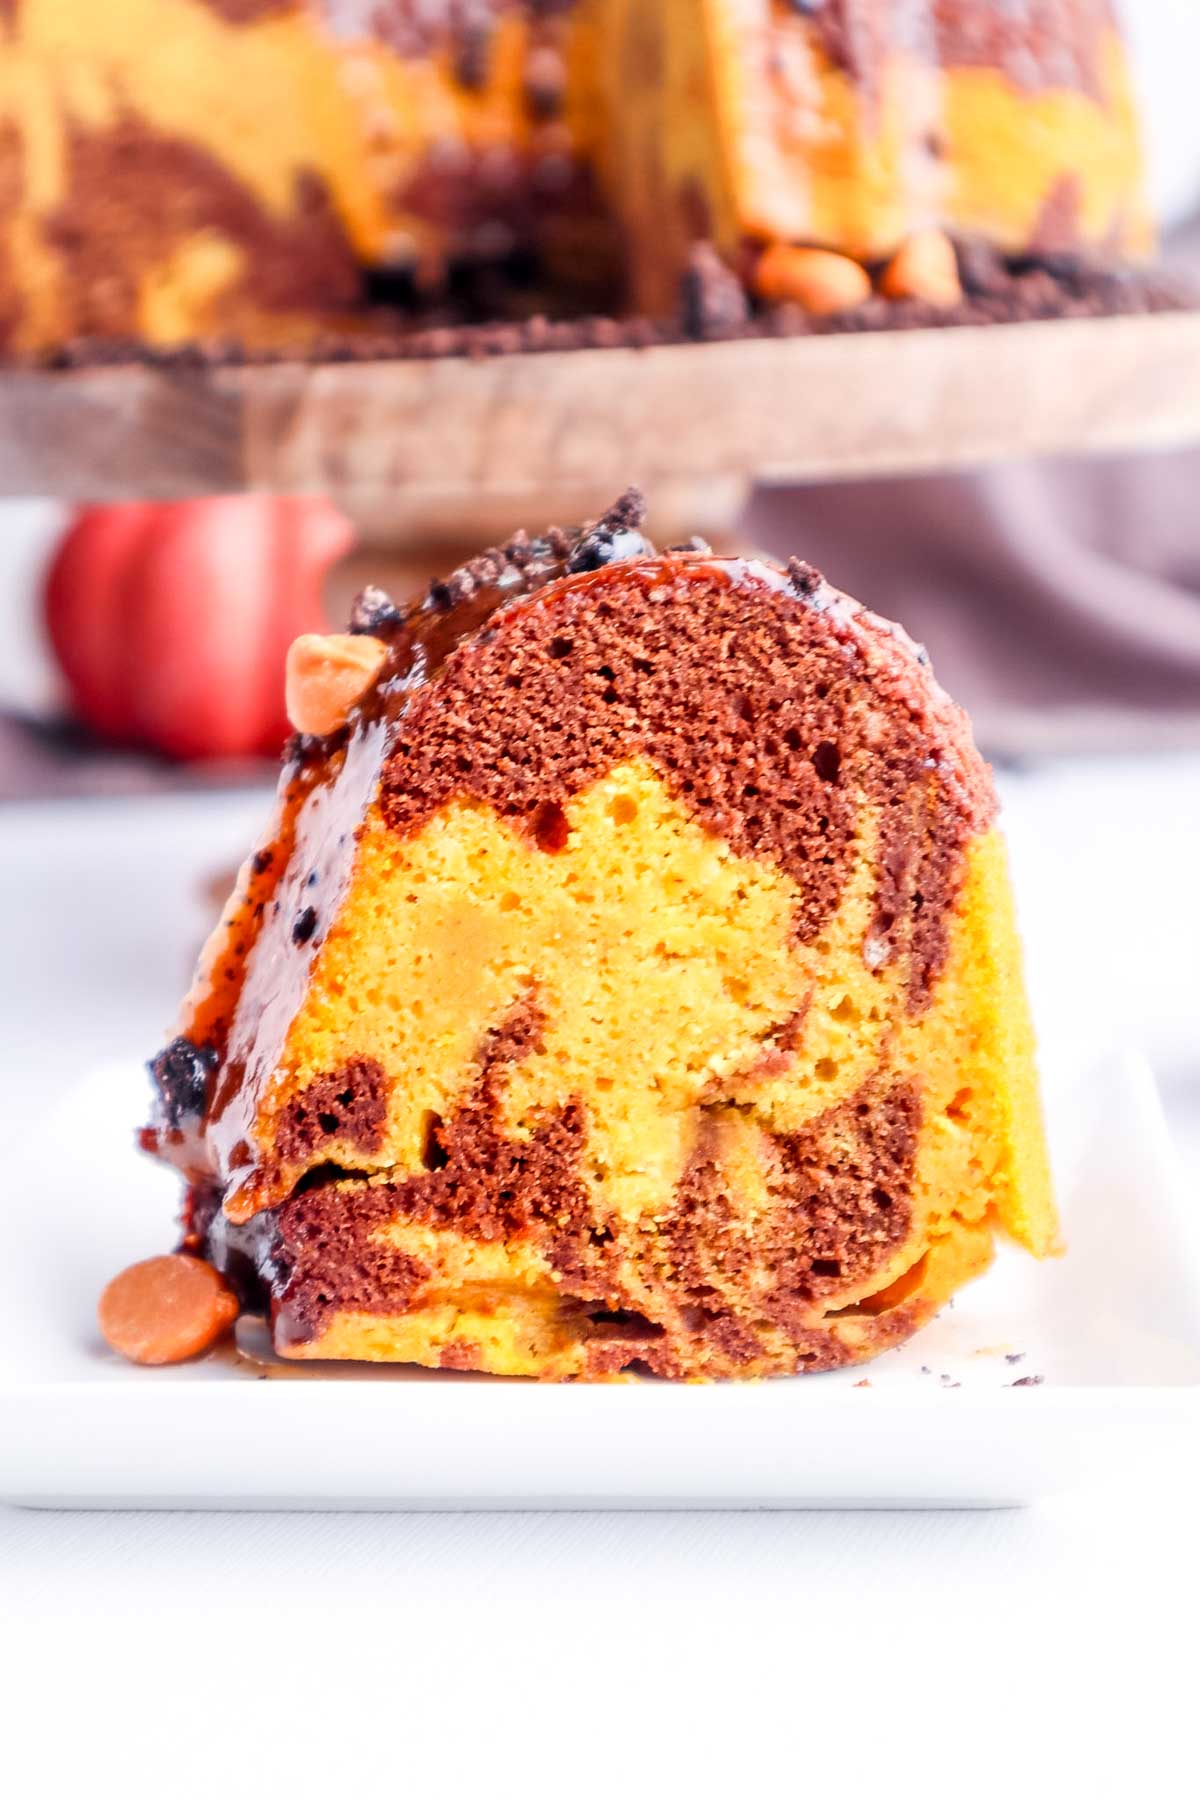 Close up shot of a swirled pumpkin and chocolate slice of bundt cake on a white plate.